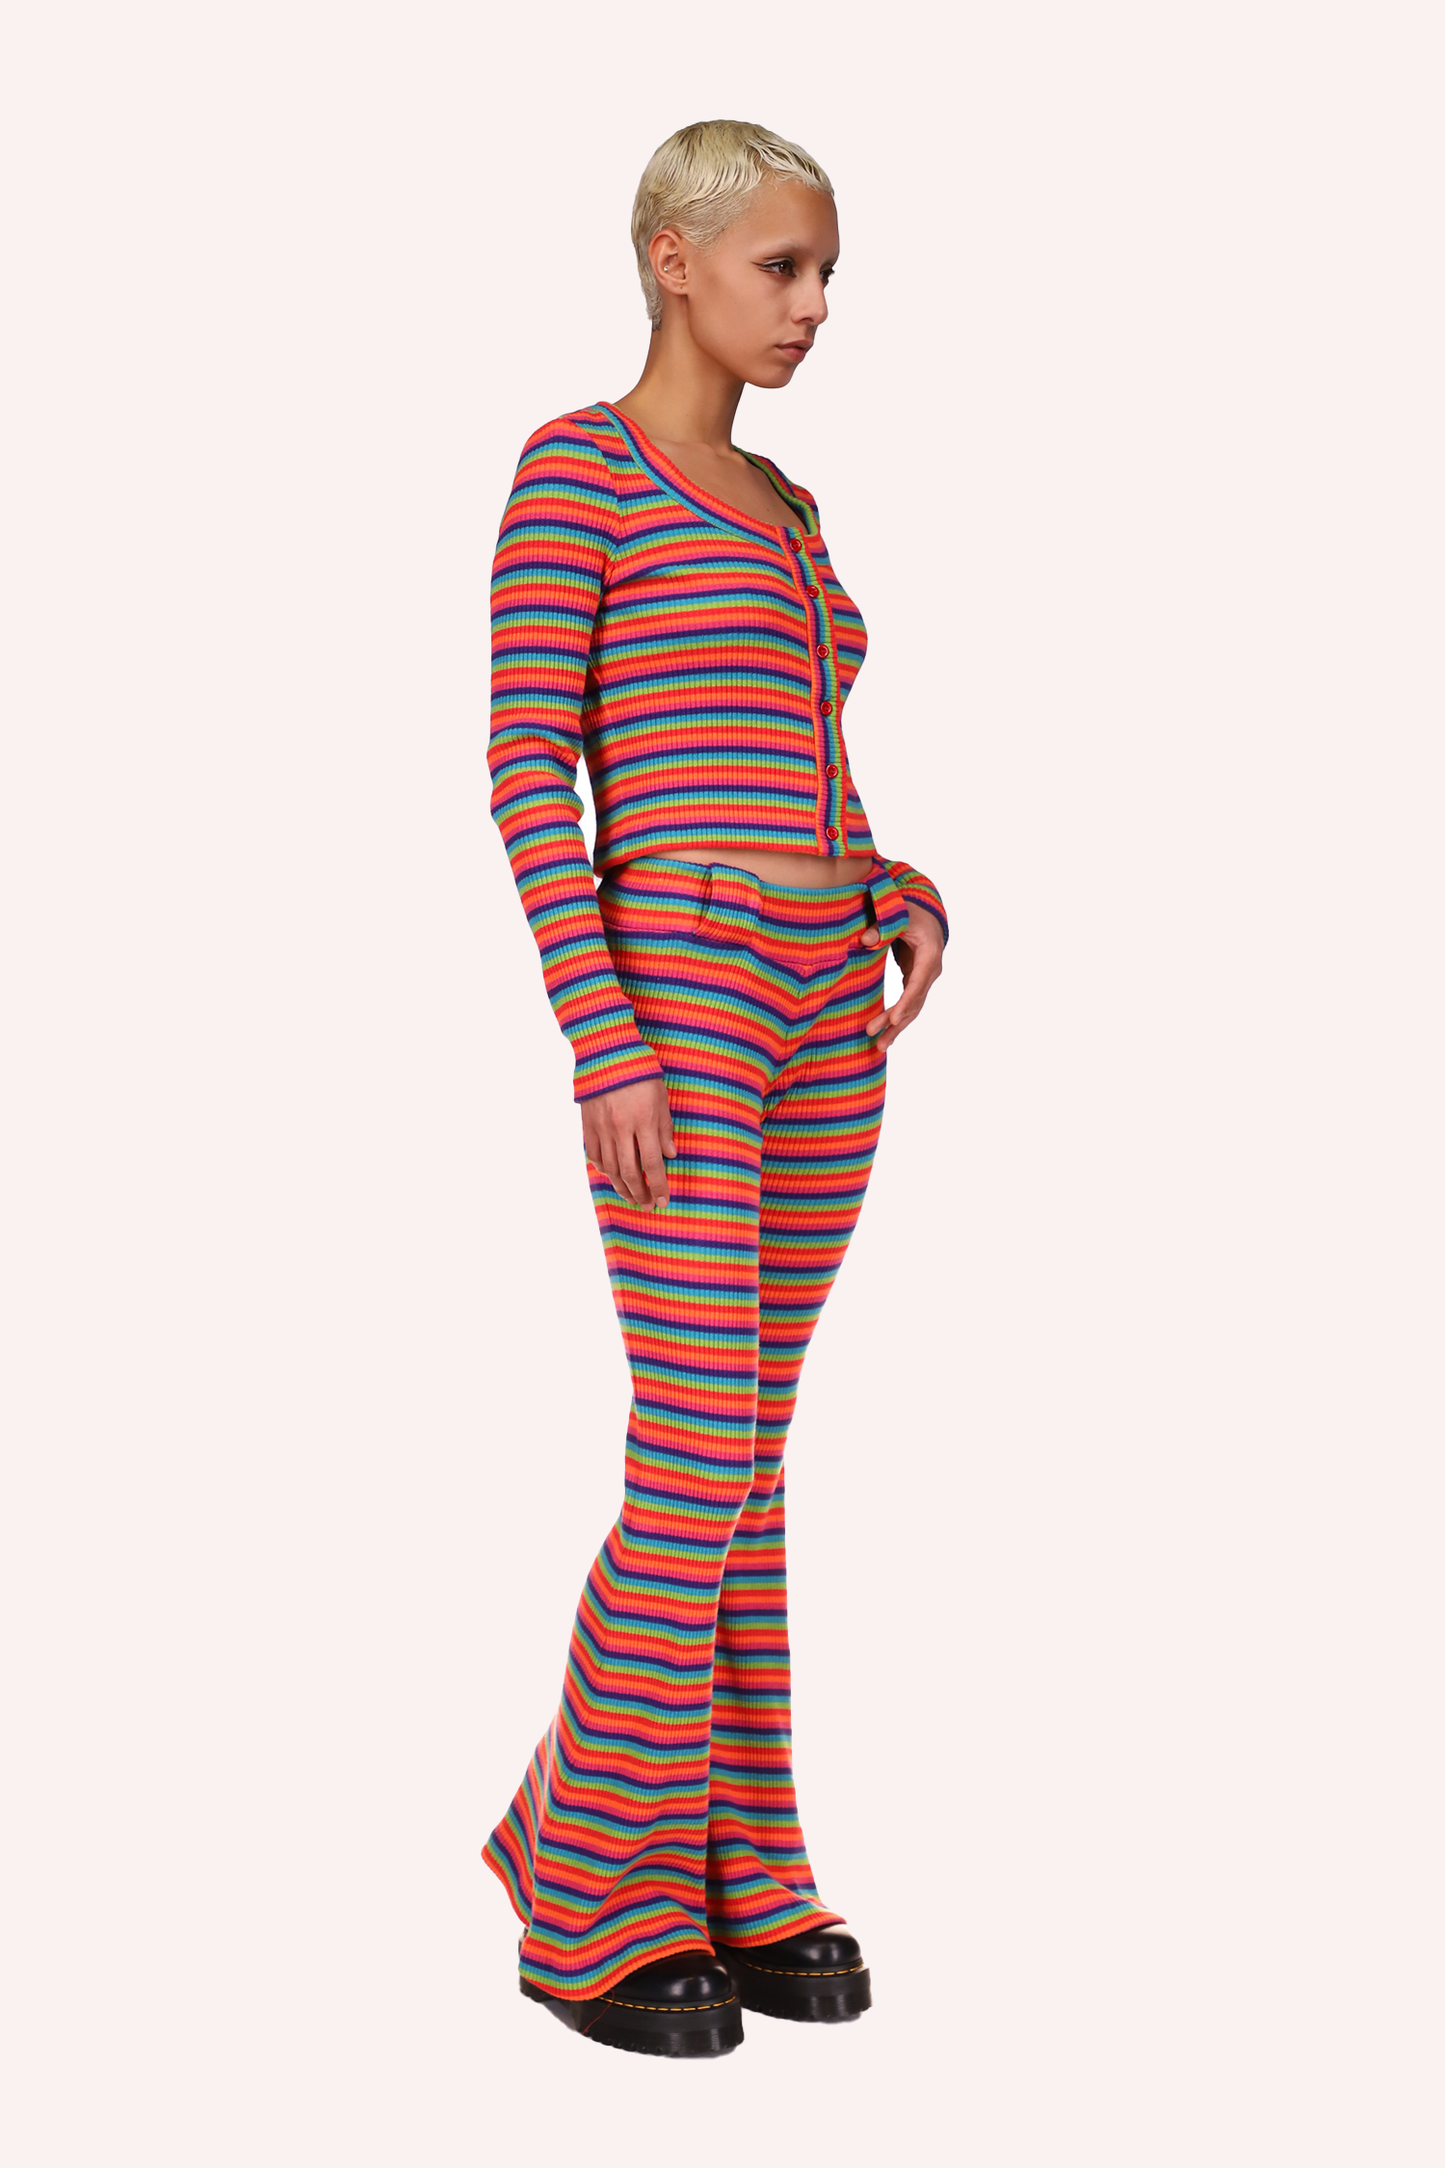 Rainbow Stripe Pants long & slim pants, very wide at the bottom over the shoes, 4 wide belt loops